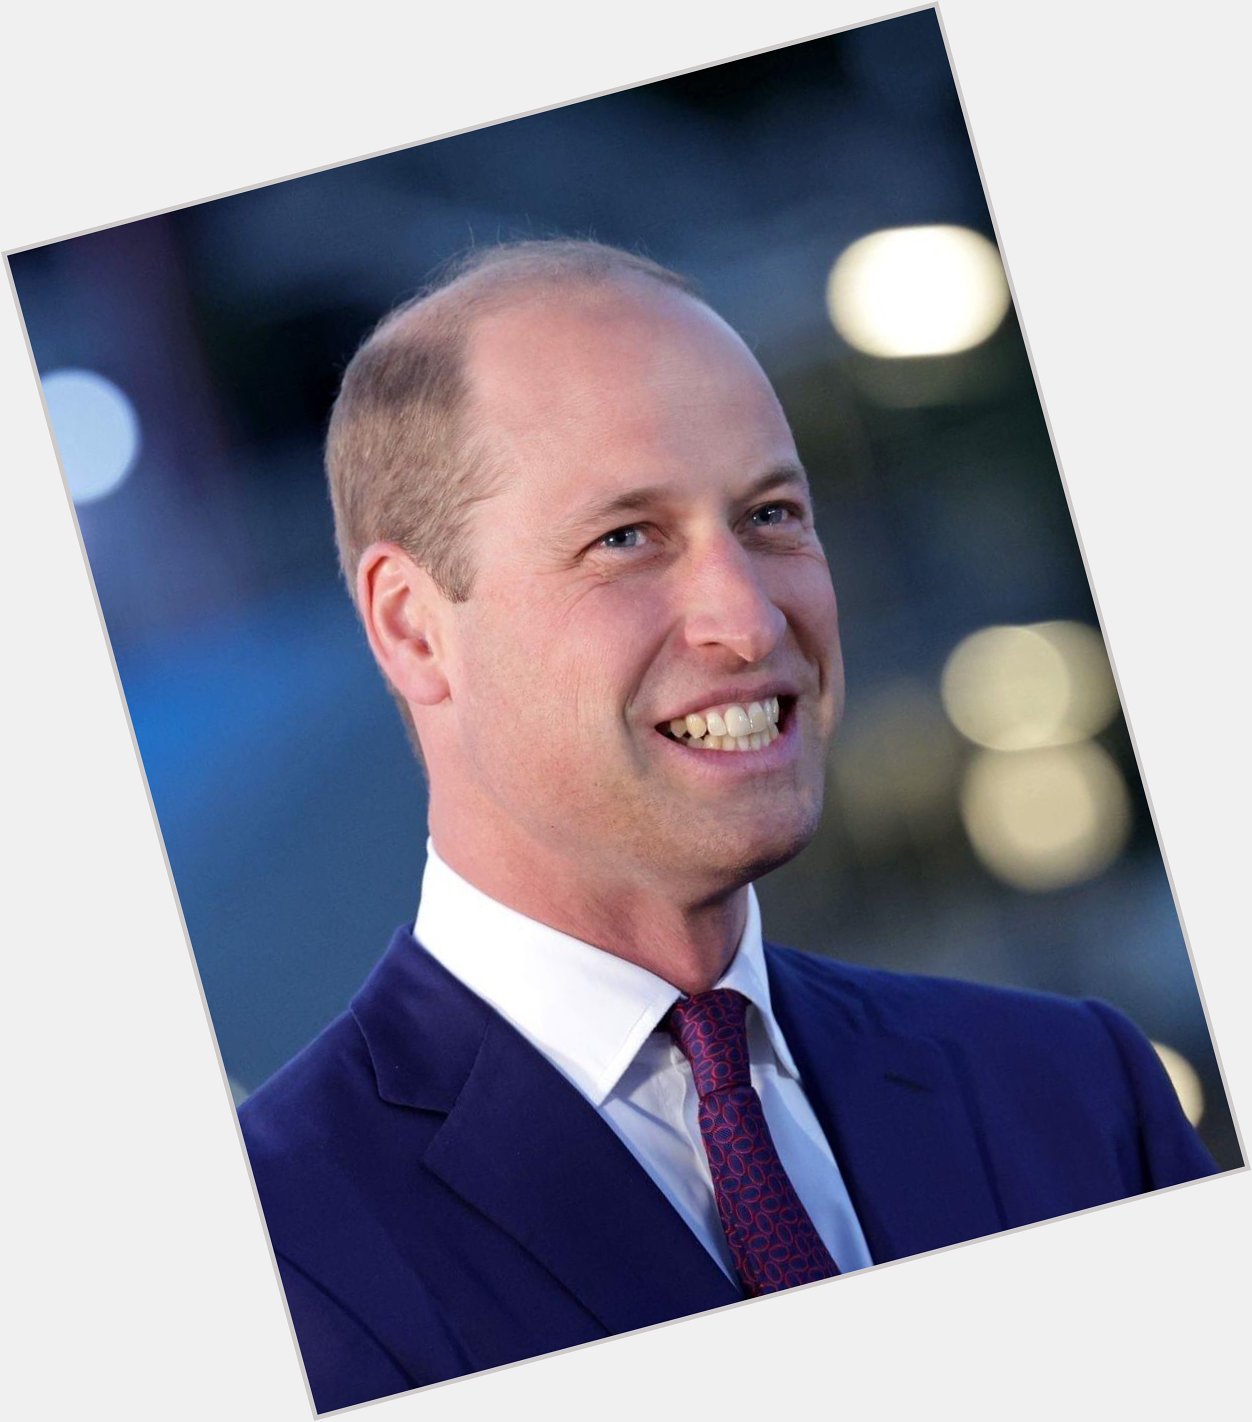 Join us in wishing Prince William,The Duke of Cambridge a very Happy 40th Birthday 